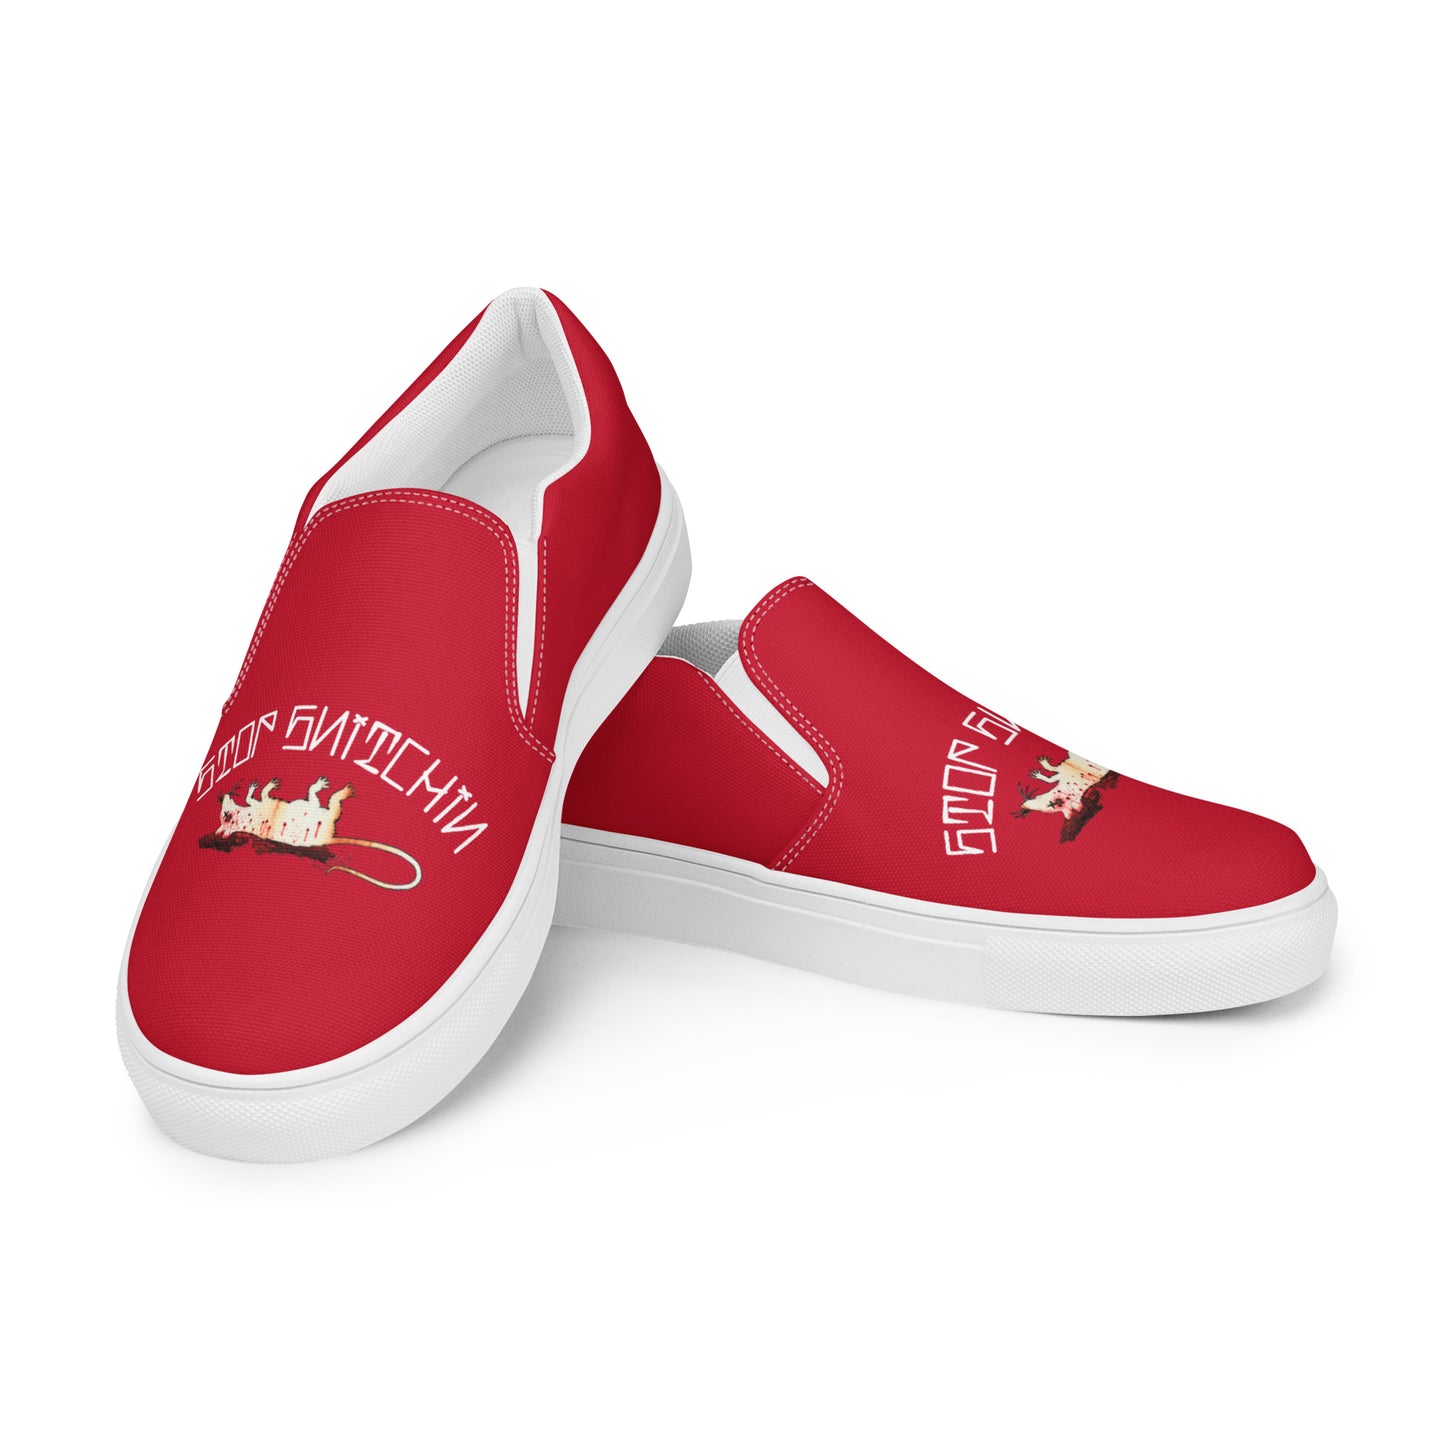 Women’s Fink Red slip-on canvas shoes